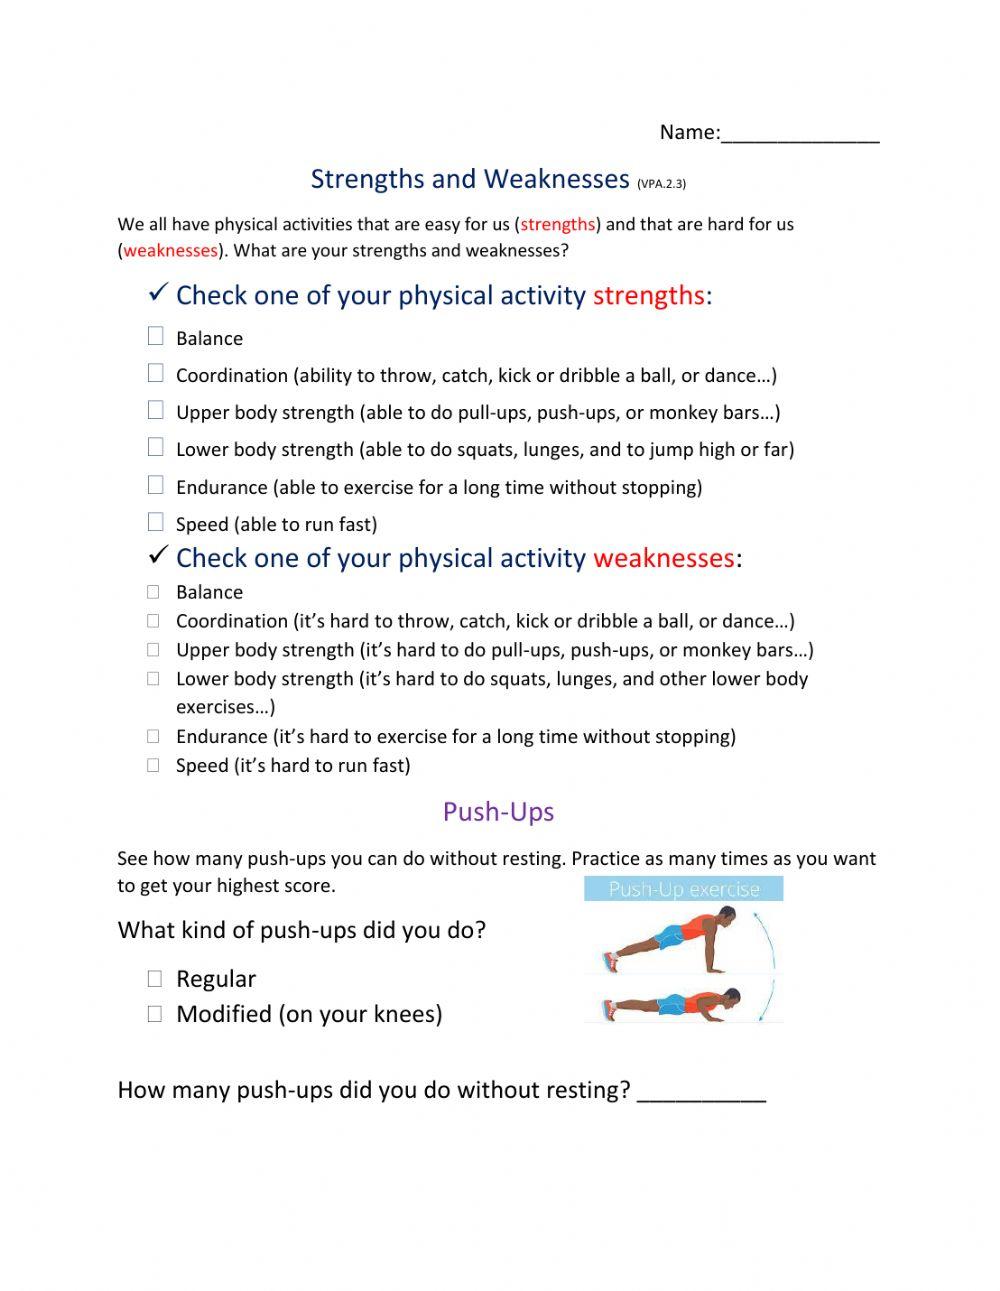 Personal Physical Strengths and Weaknesses